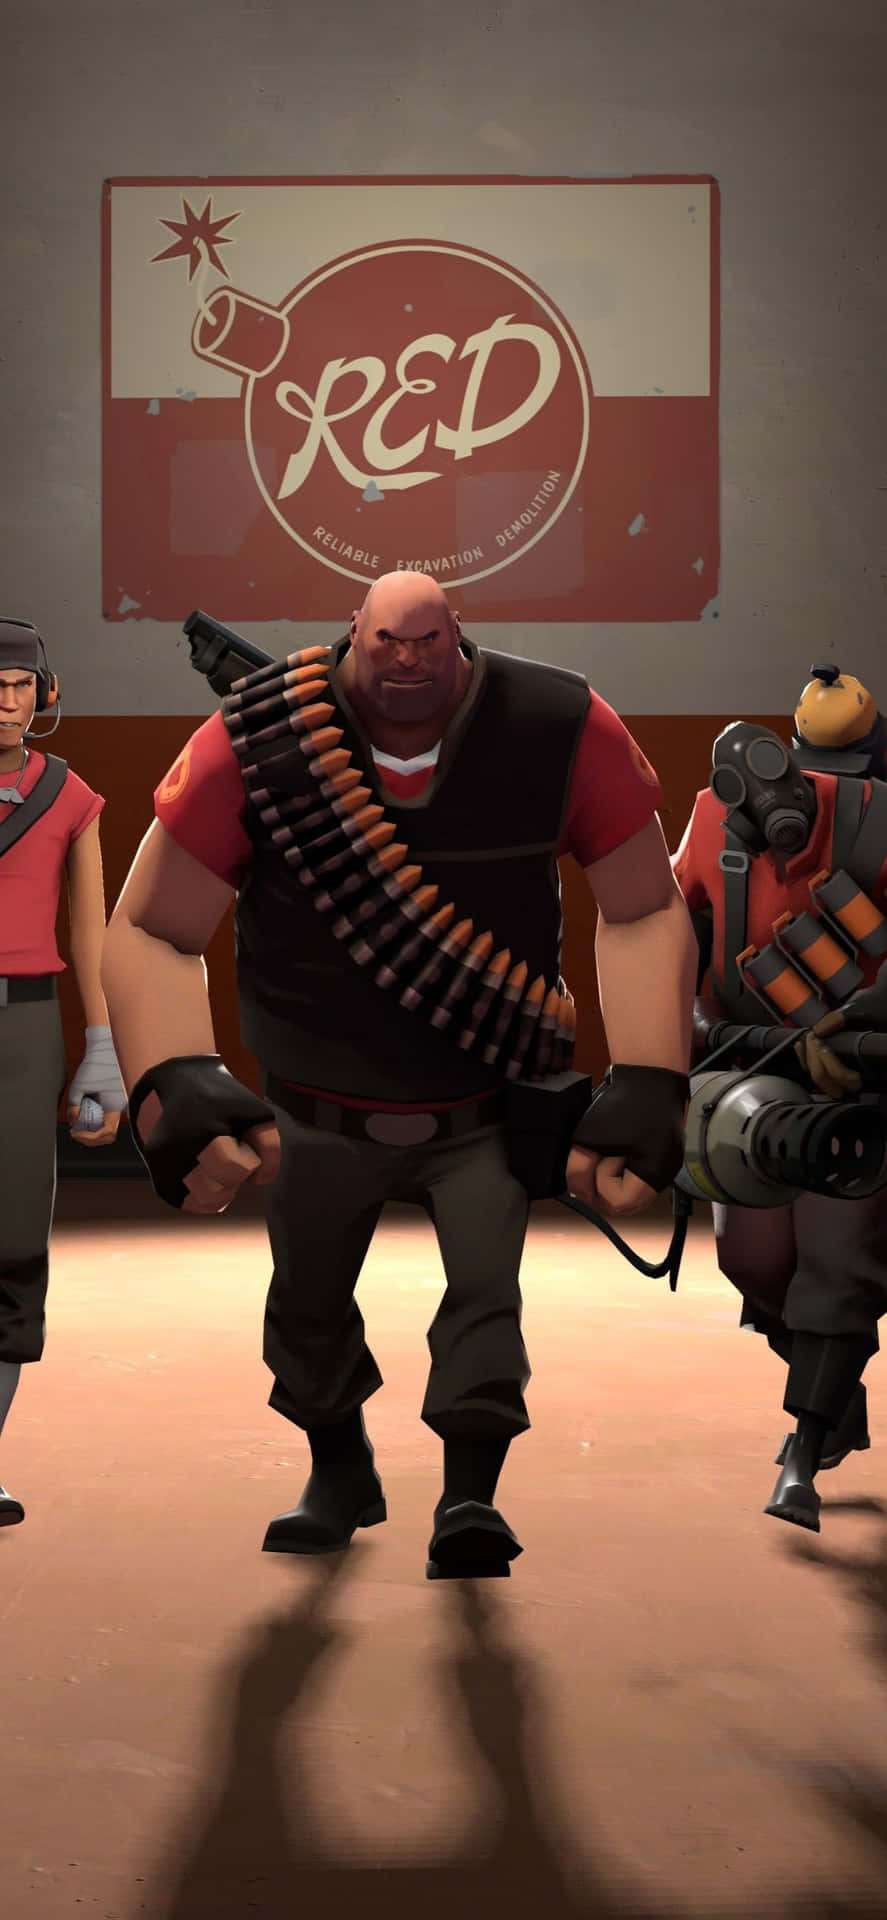 iPhone XS Team Fortress 2 Offensive Hold Baggrunds Tapet